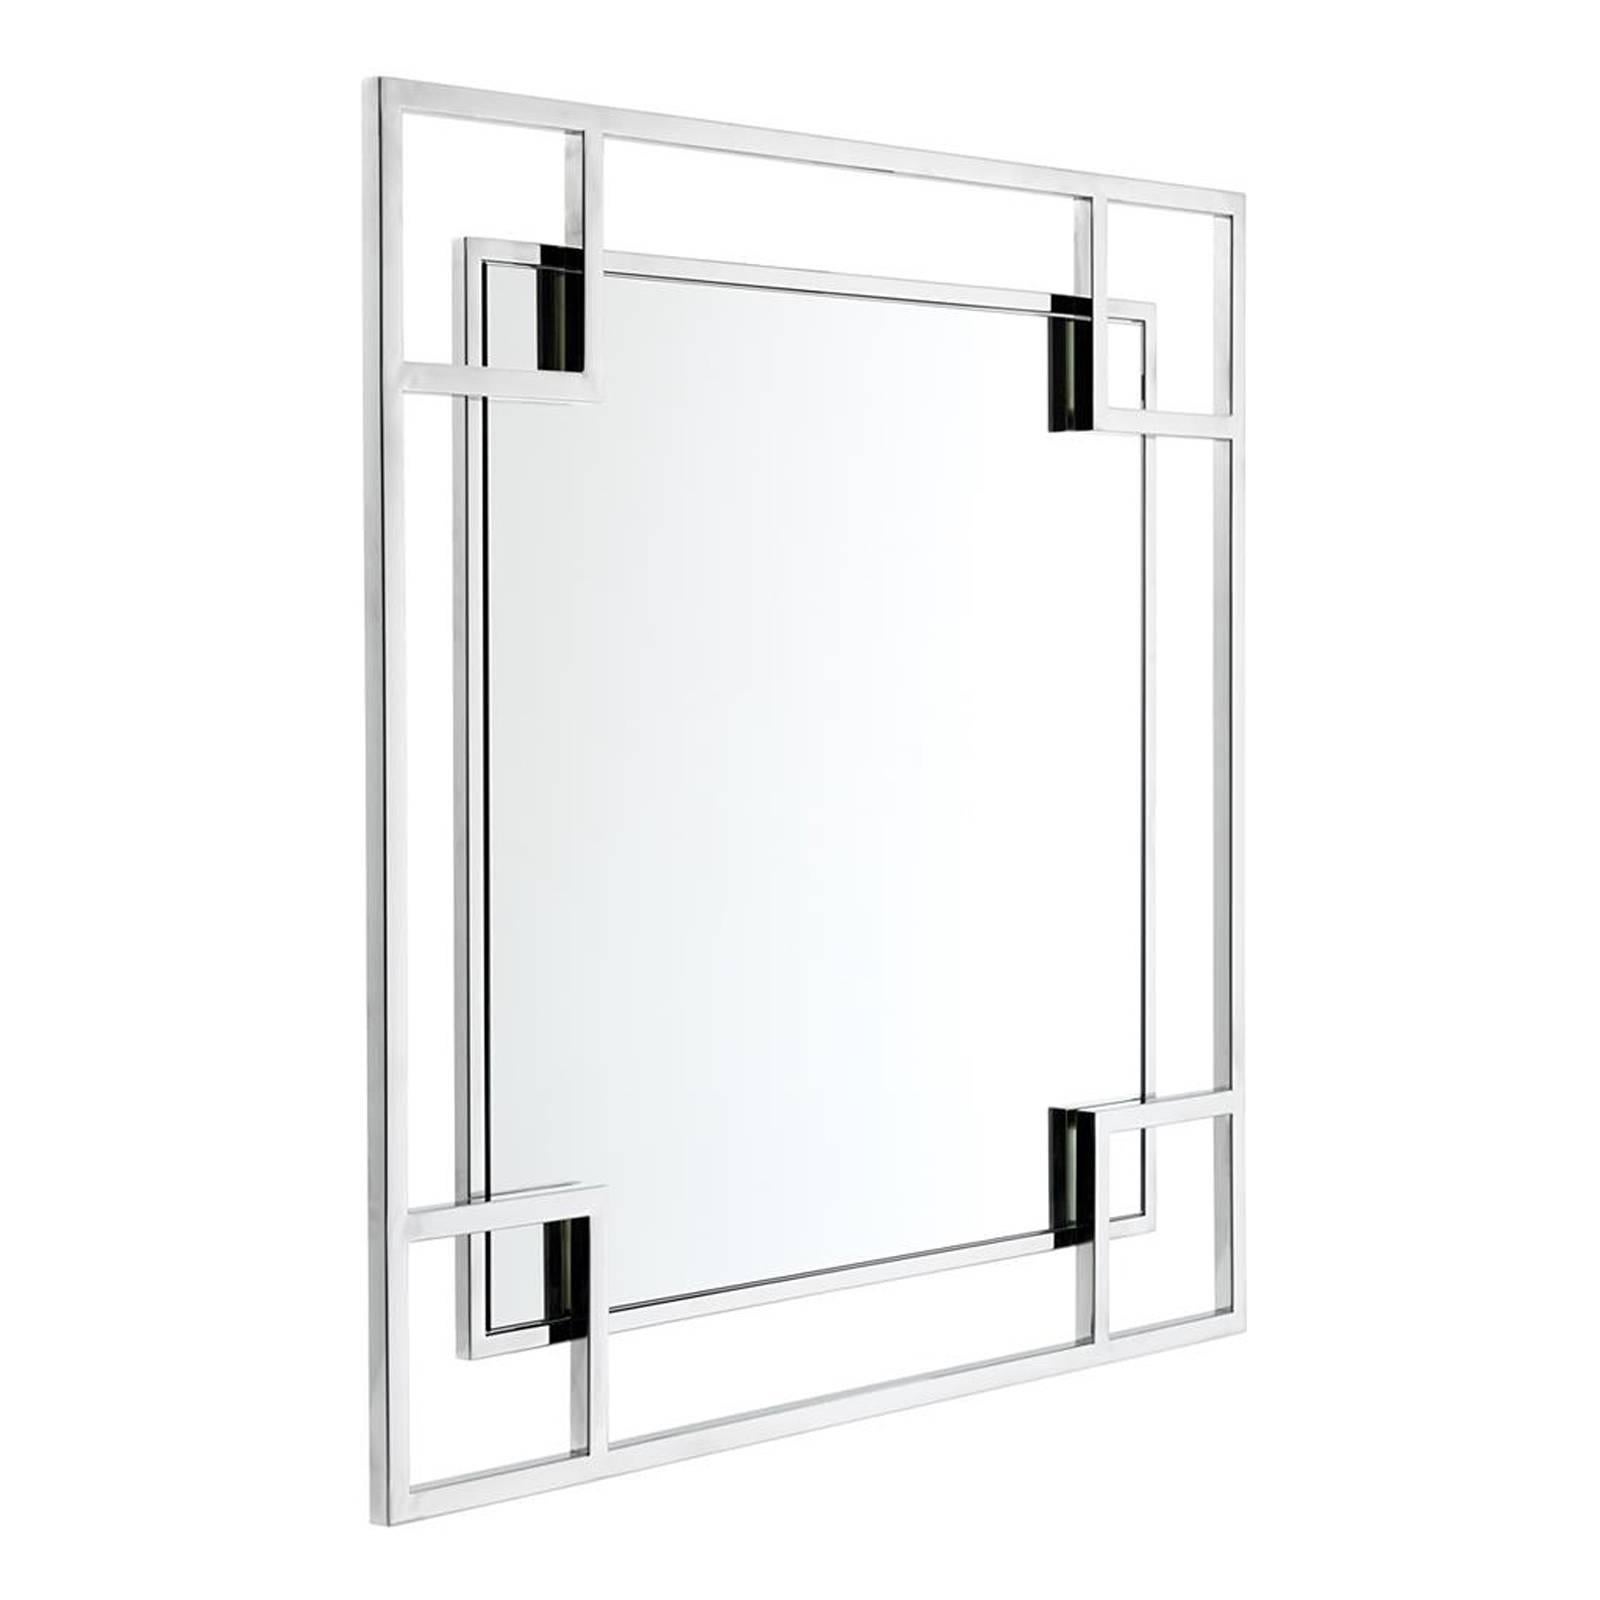 Mirror slim square with polished stainless 
steel frame and square mirror glass.
Also available in gold finish.
Pacific Cmpagnie collection.